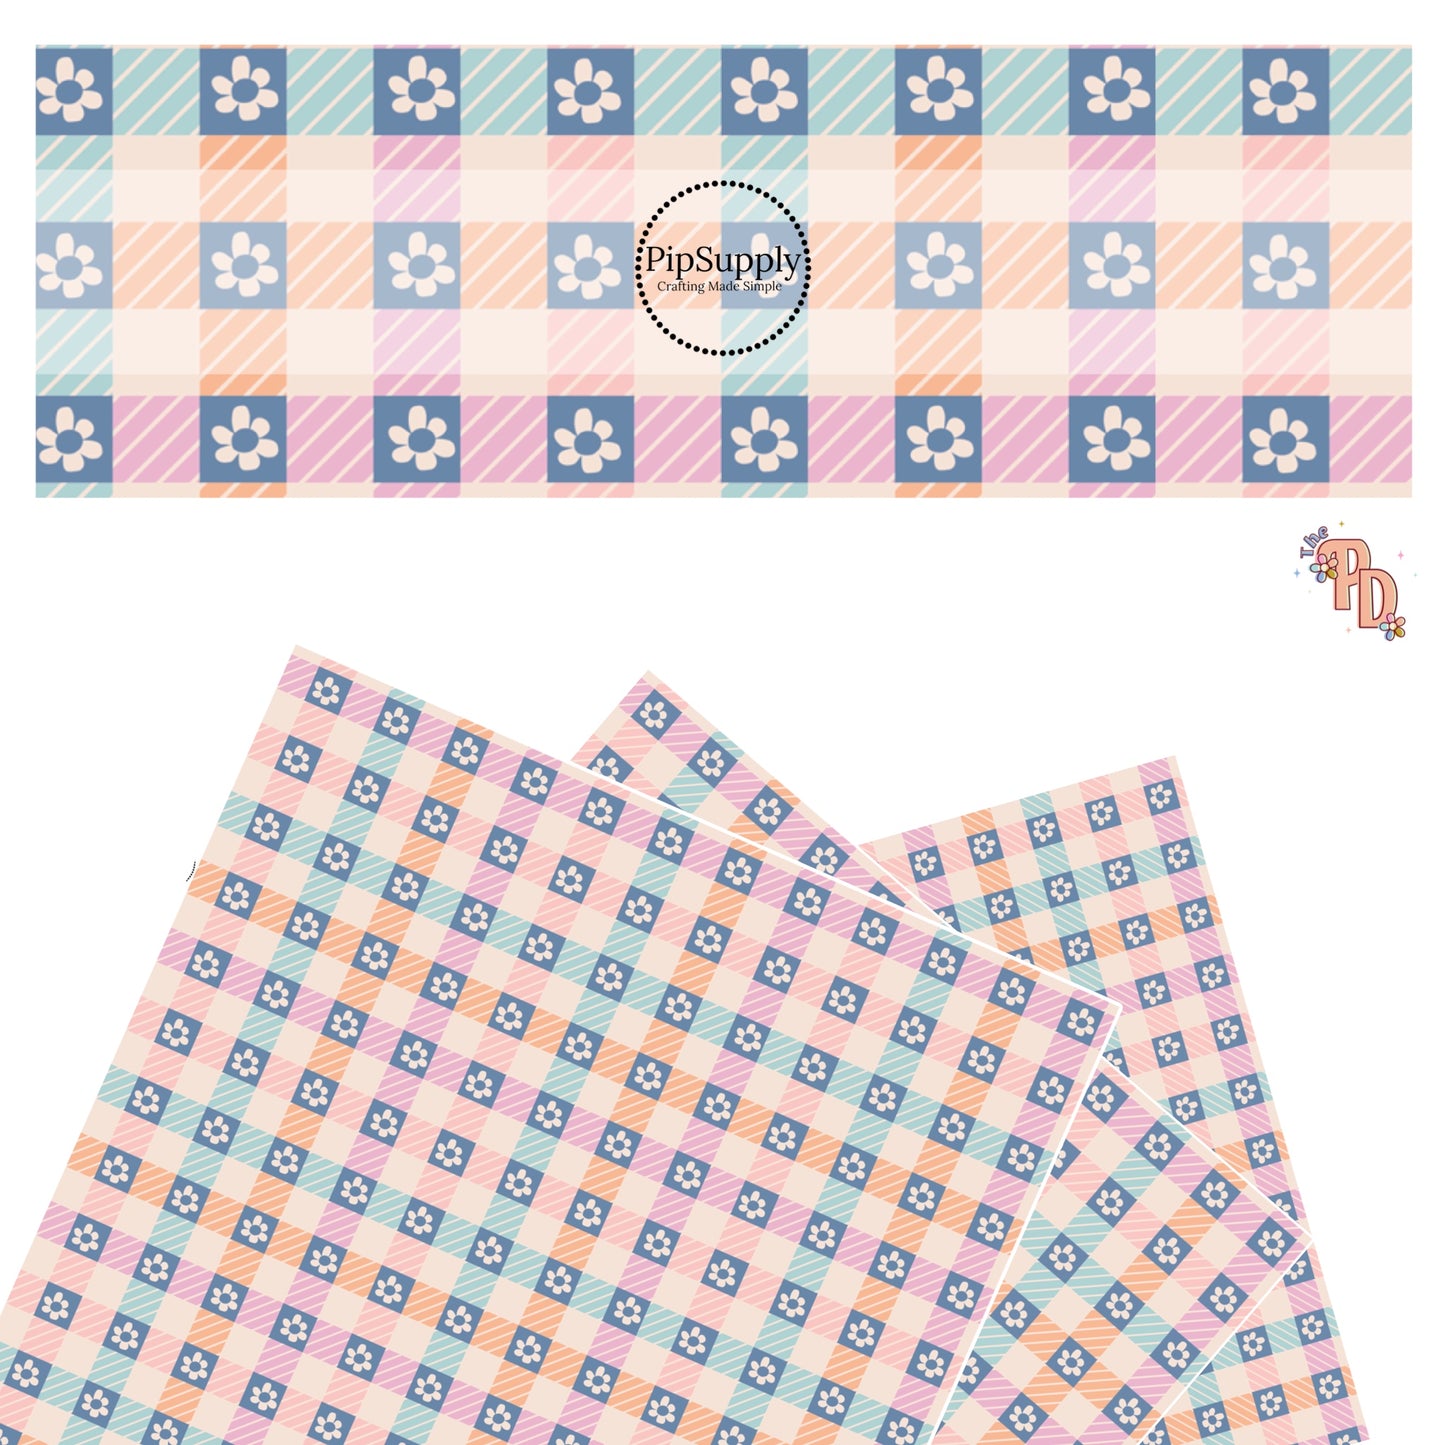 These spring checker pattern themed faux leather sheets contain the following design elements: small flowers on pink, orange, and blue checkers. Our CPSIA compliant faux leather sheets or rolls can be used for all types of crafting projects.